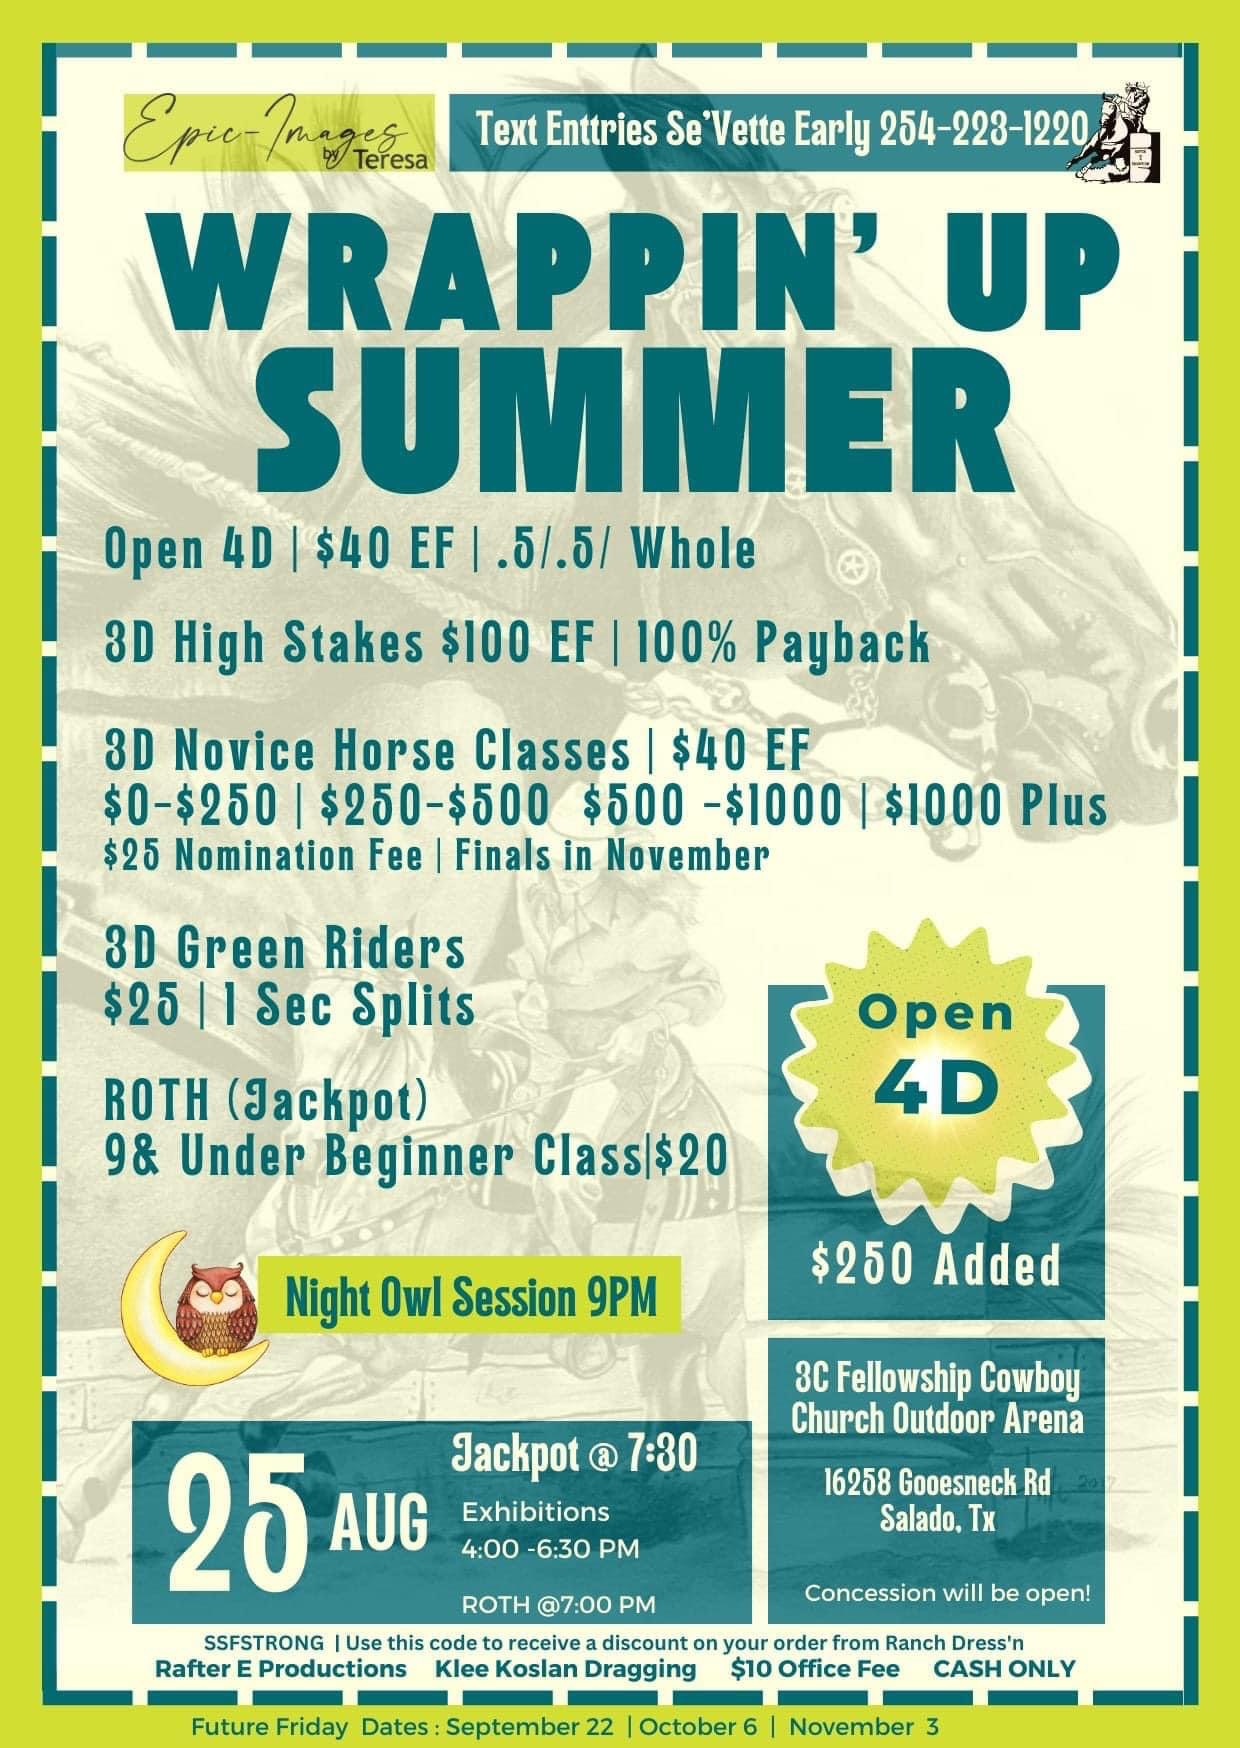 Wrappin' Up Summer Race